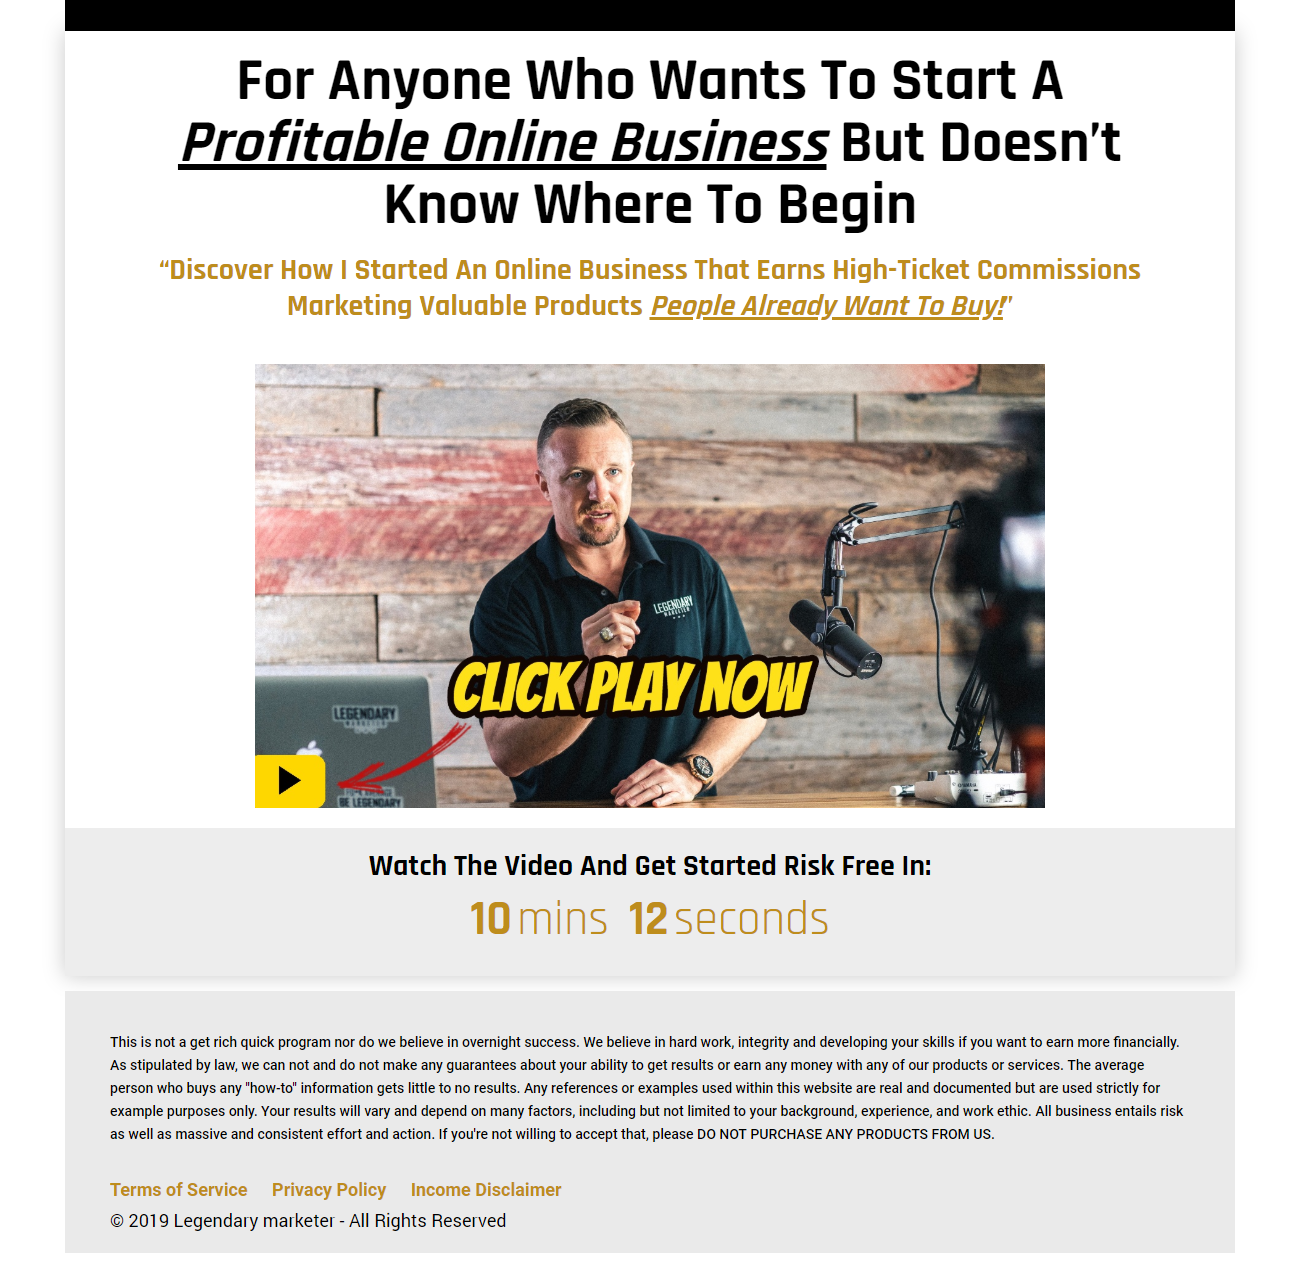 For Anyone Who Wants To Start A Profitable Online Business But Doesn’t Know Where To Begin